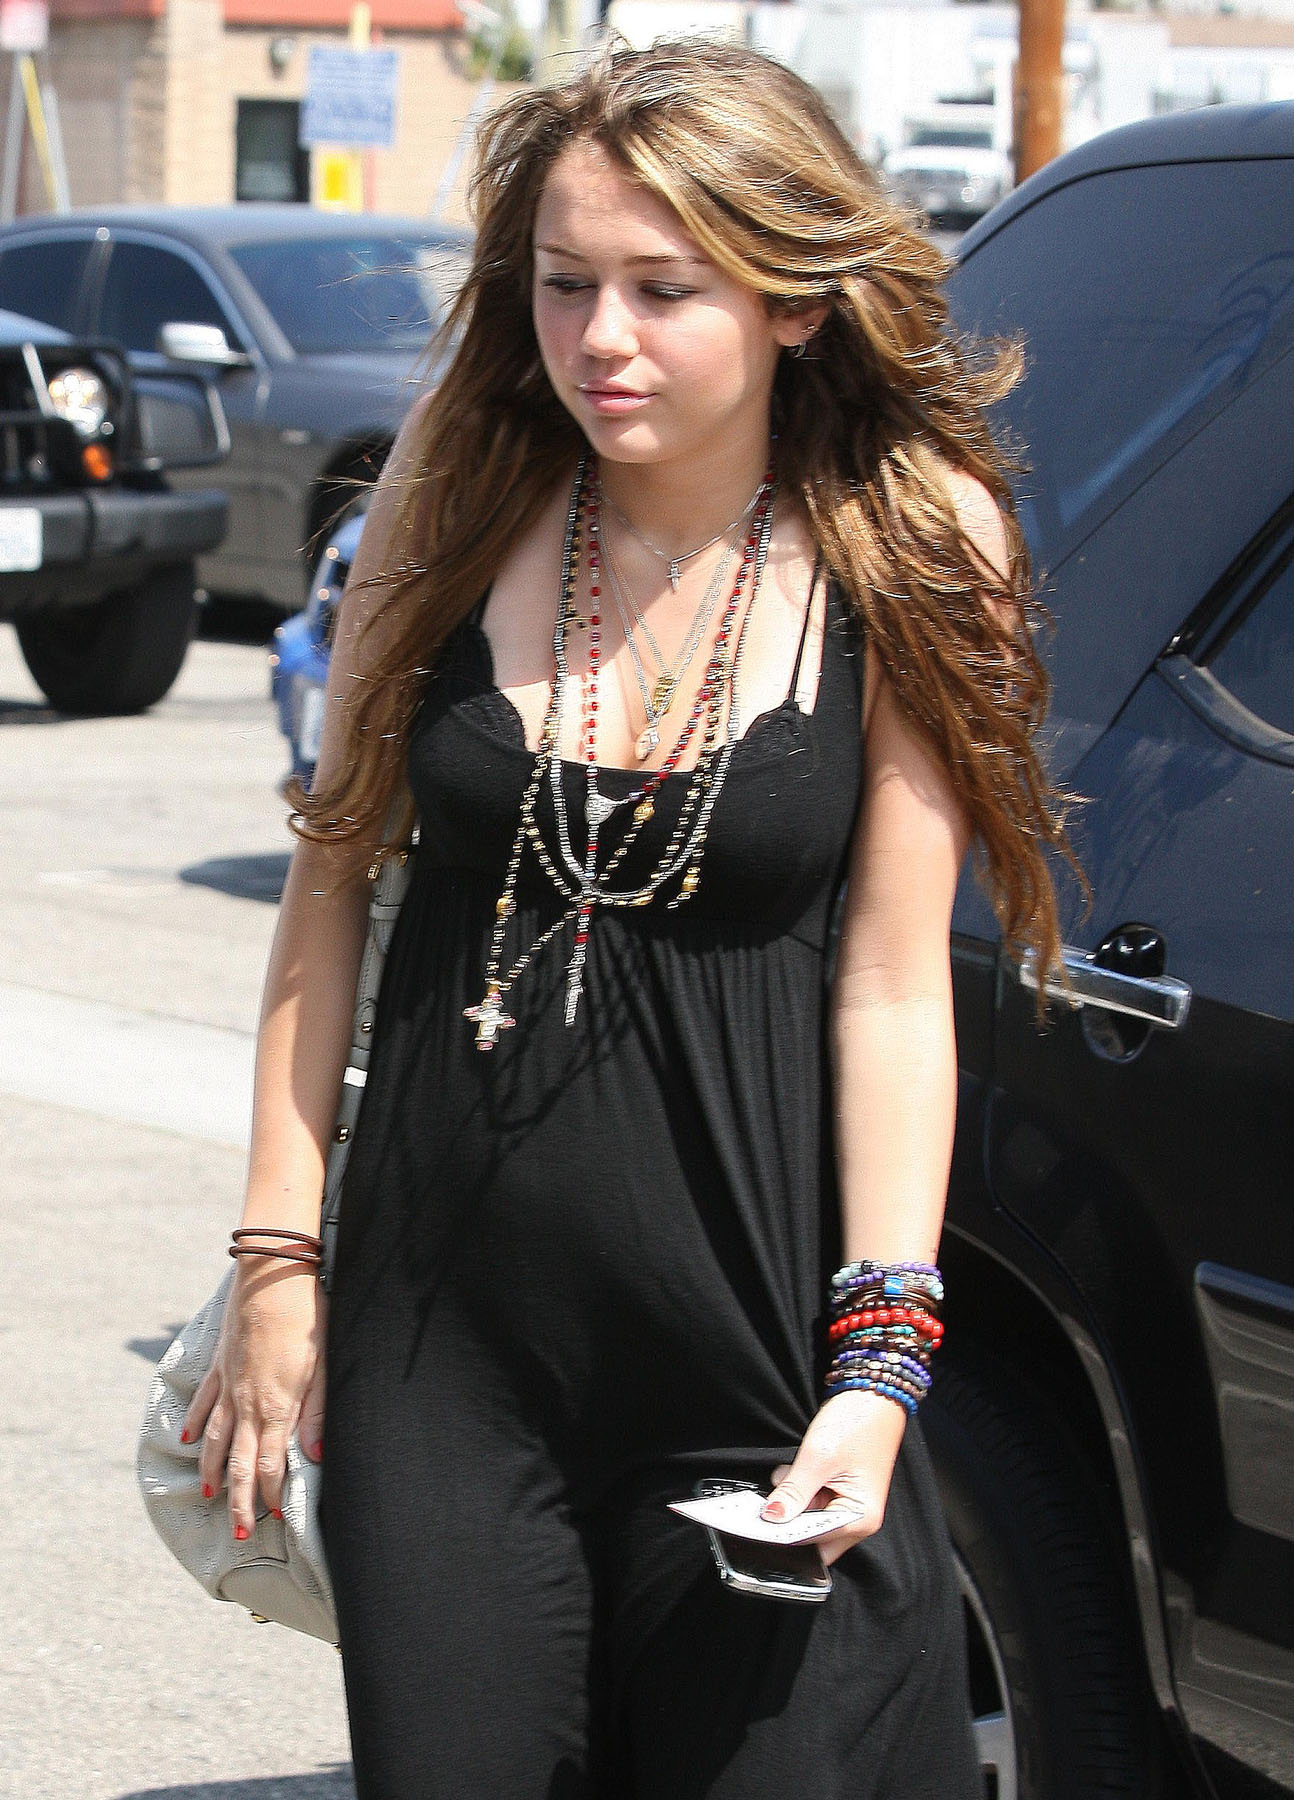 Miley-Cyrus-20090831_Out-n-About-Studio-City_May09_01120.jpg